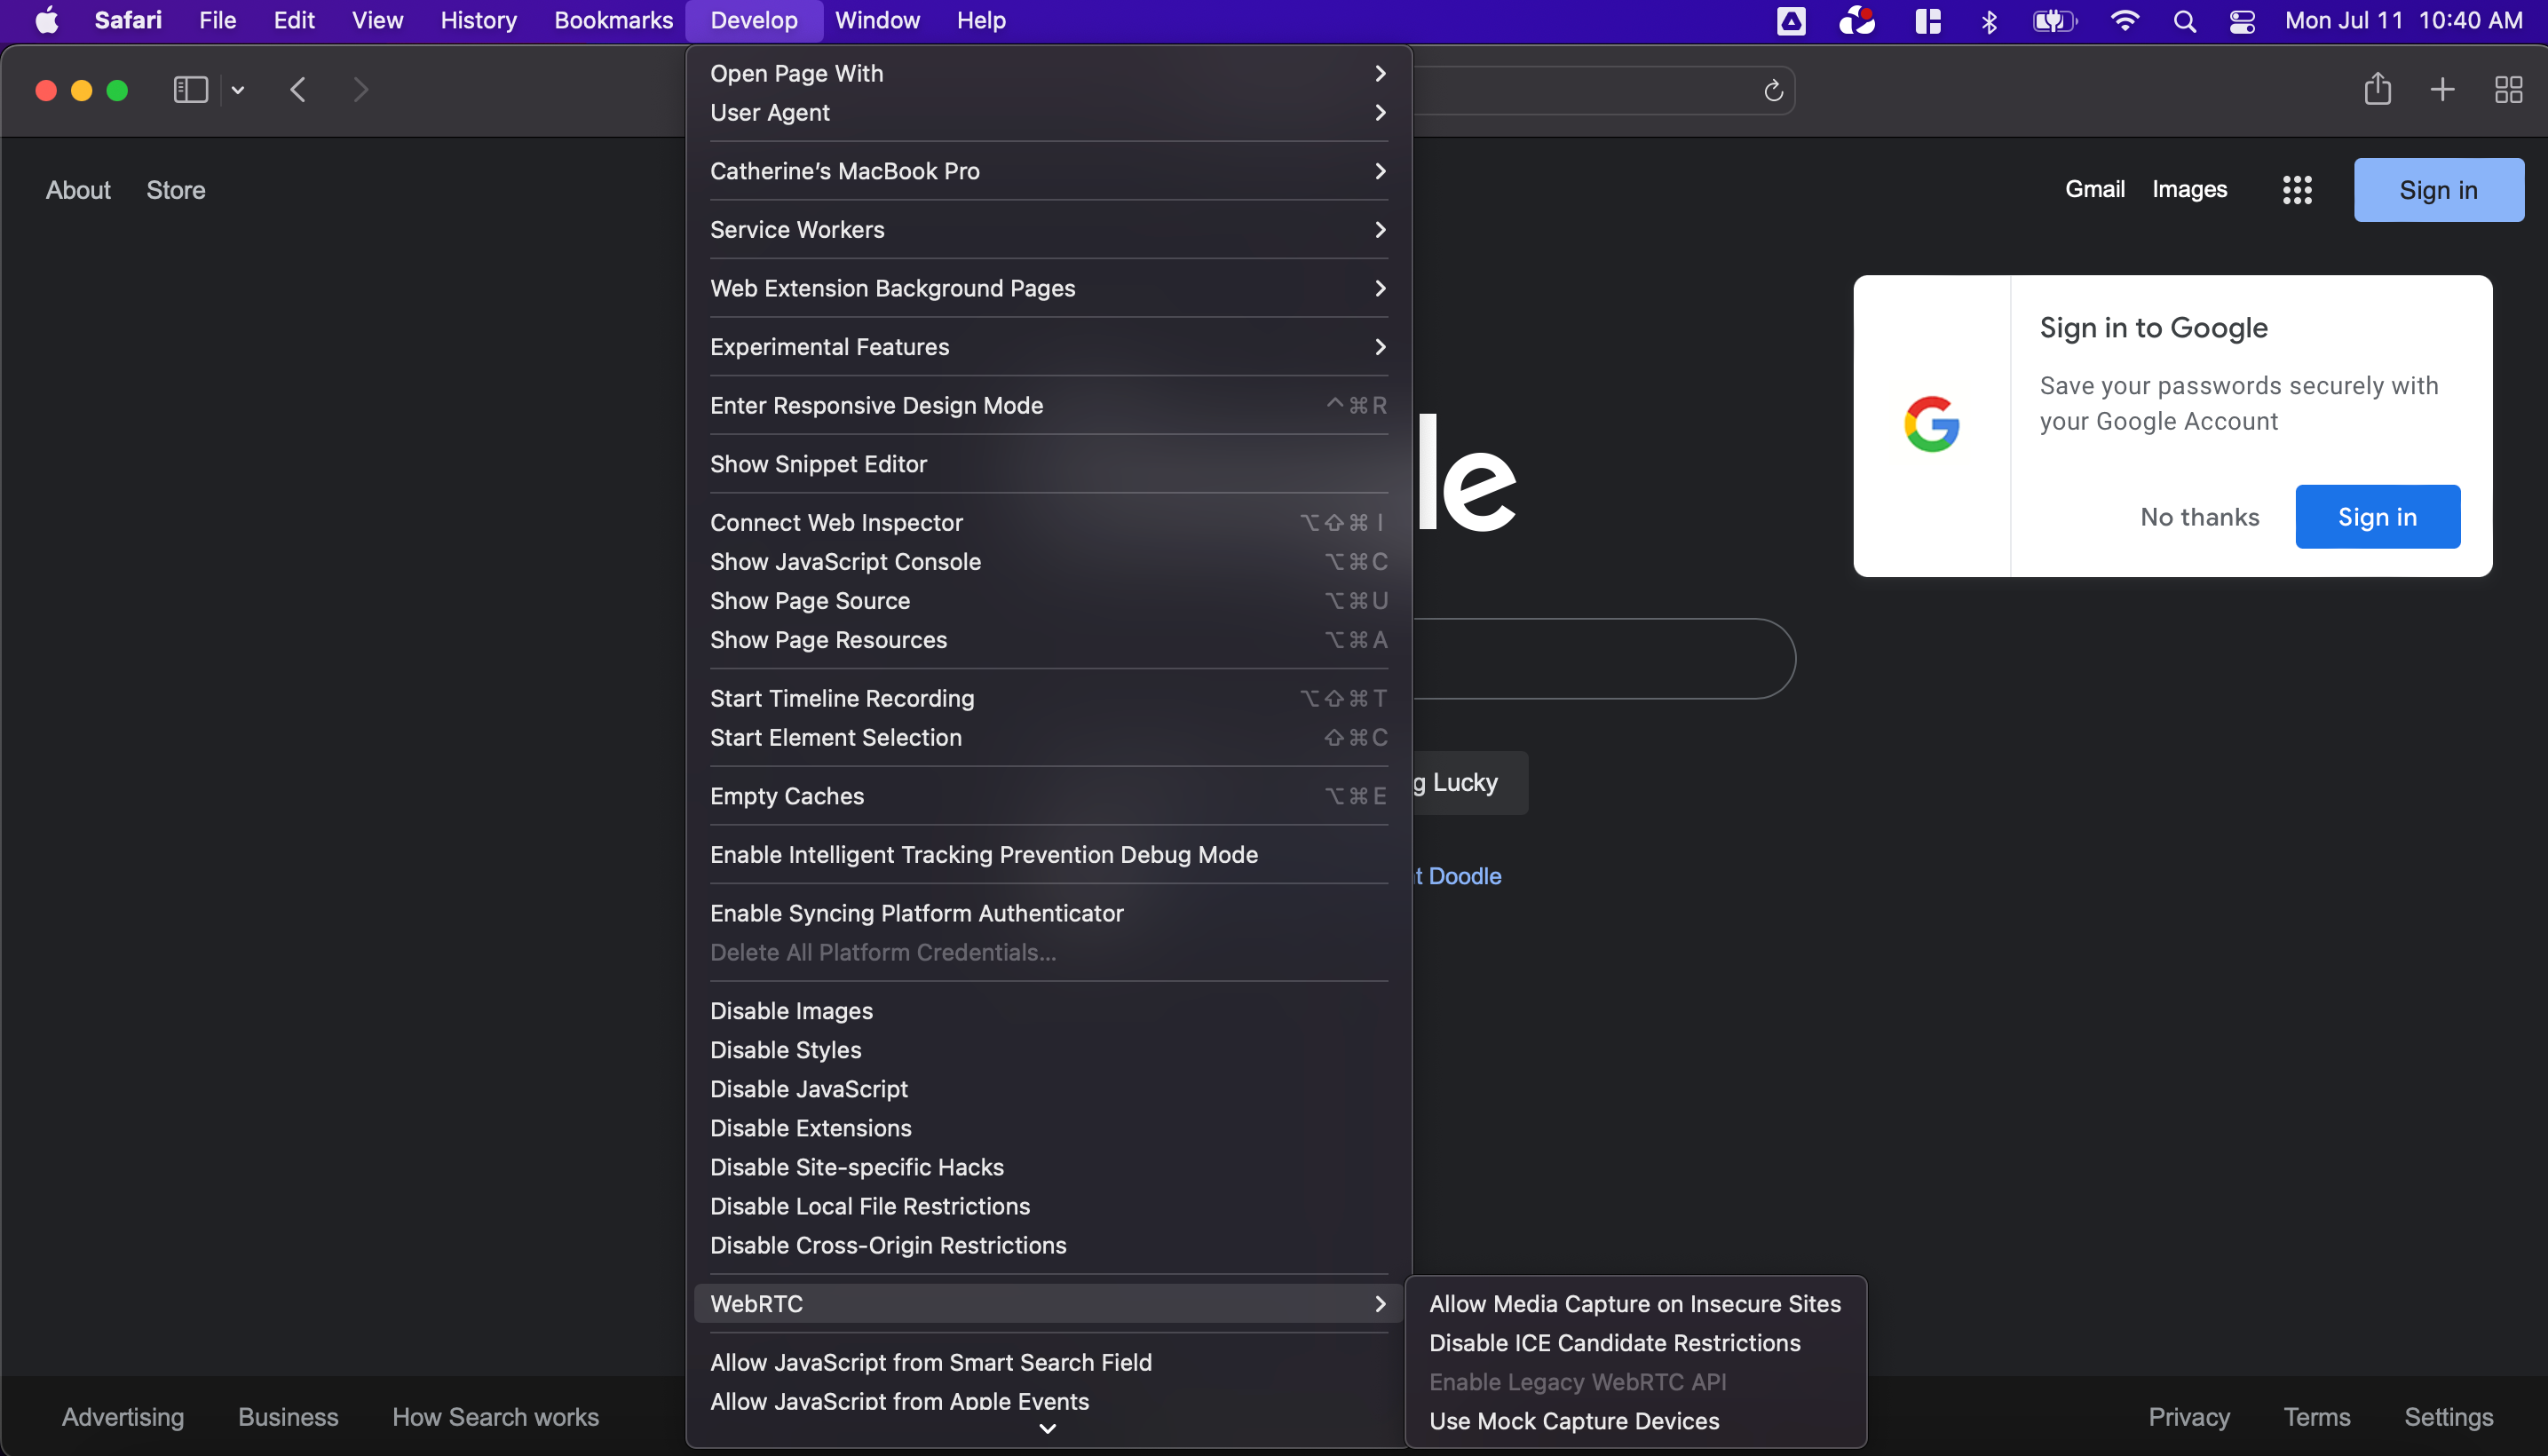 A screenshot of Apple Safari in dark mode showing the Develop menu and the WebRTC drop-down menu selected. The "Enable Legacy WebRTC API" option is unchecked.